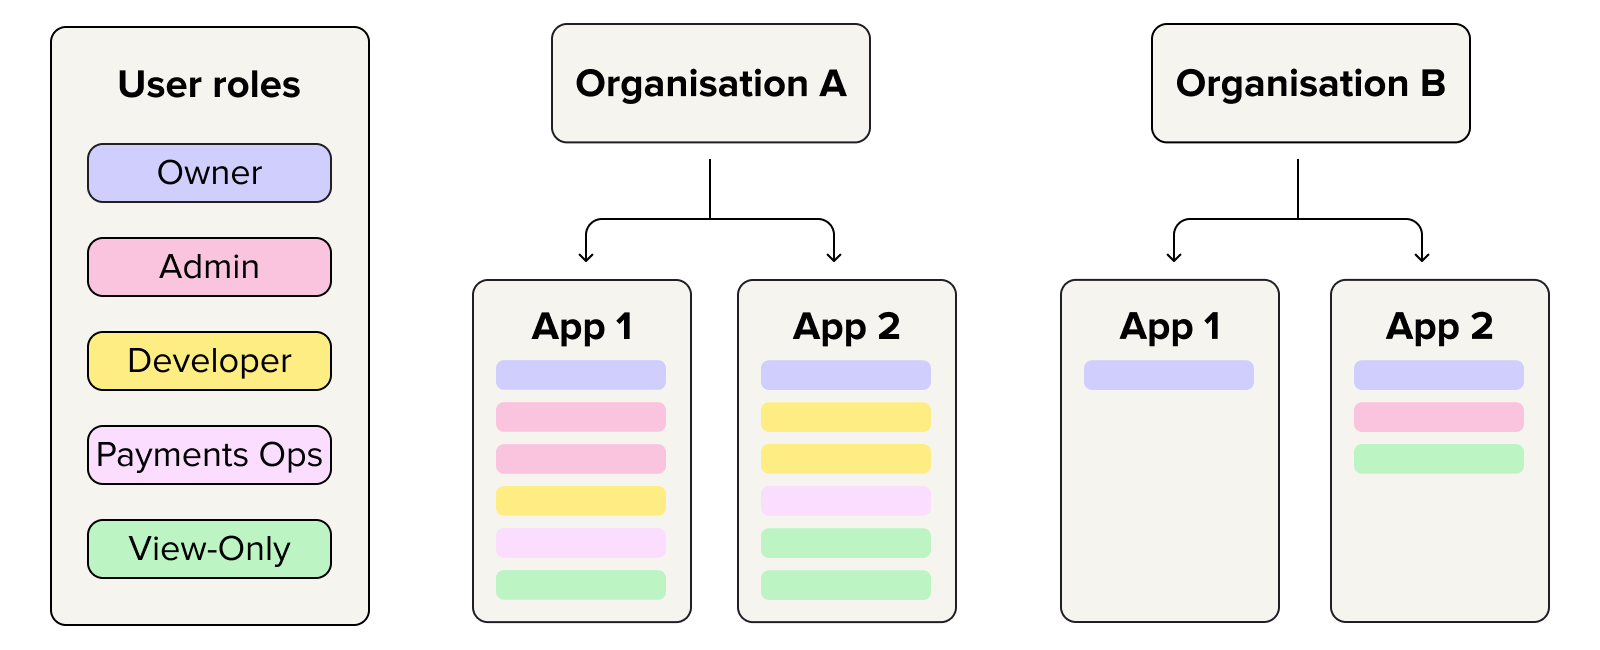 A diagram that shows how each organisation can contain multiple apps, which each contain a variety of user roles.